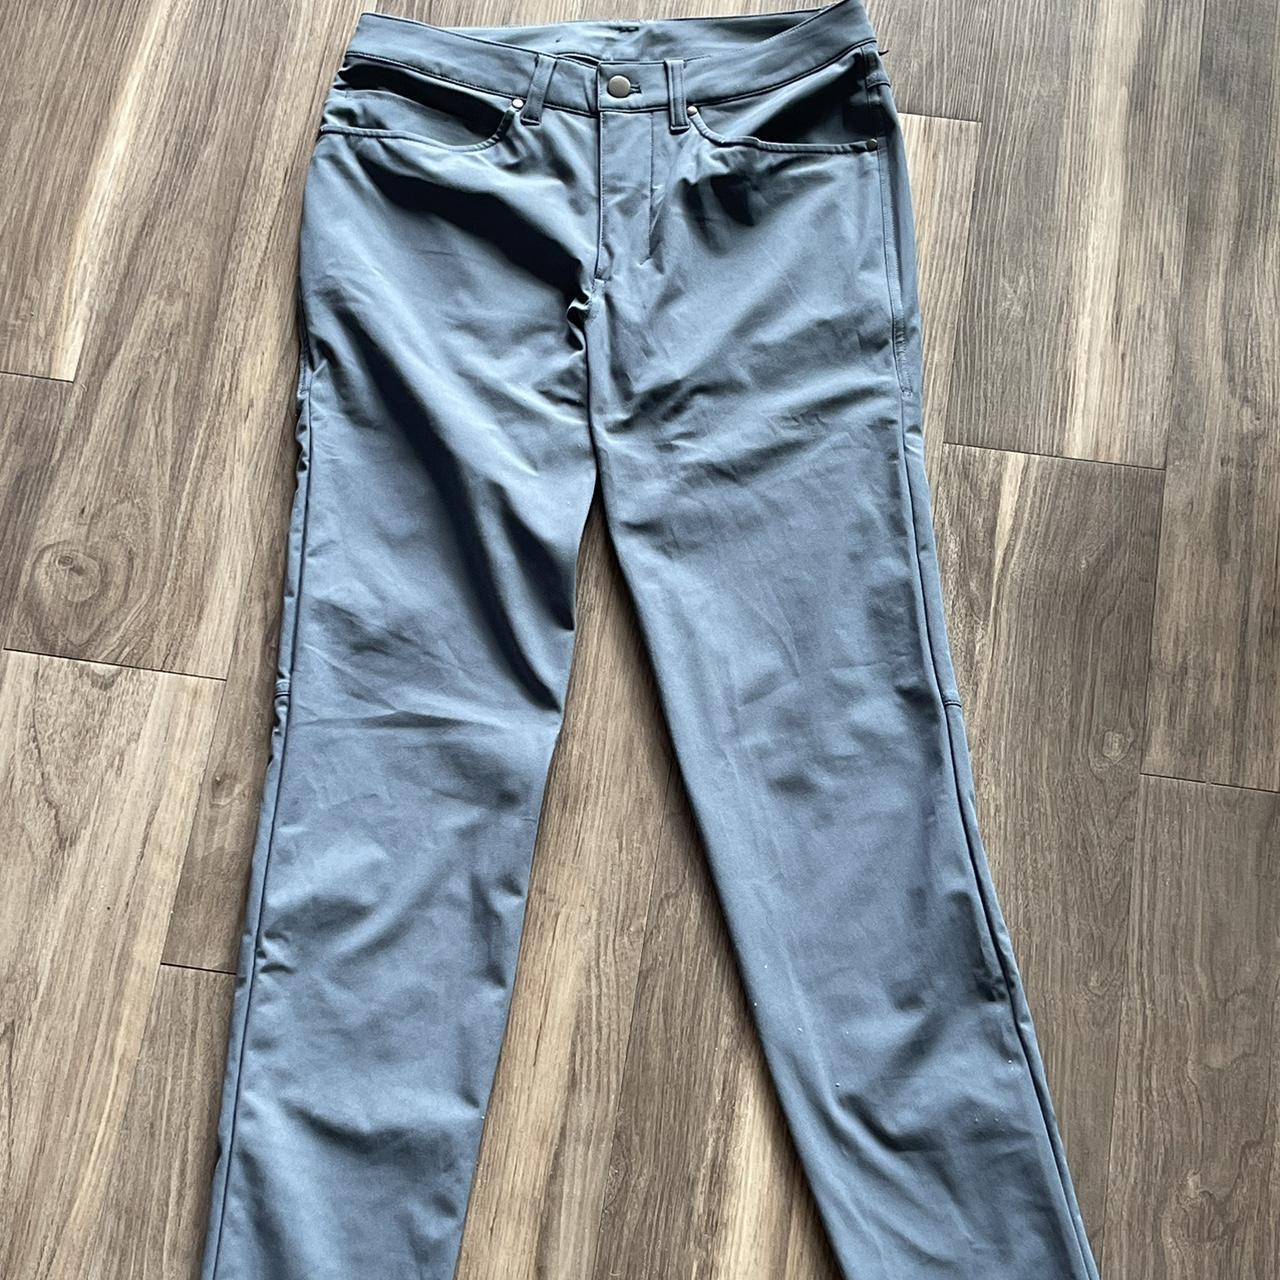 Lululemon Abc Pants Review Reddit.com | International Society of Precision  Agriculture